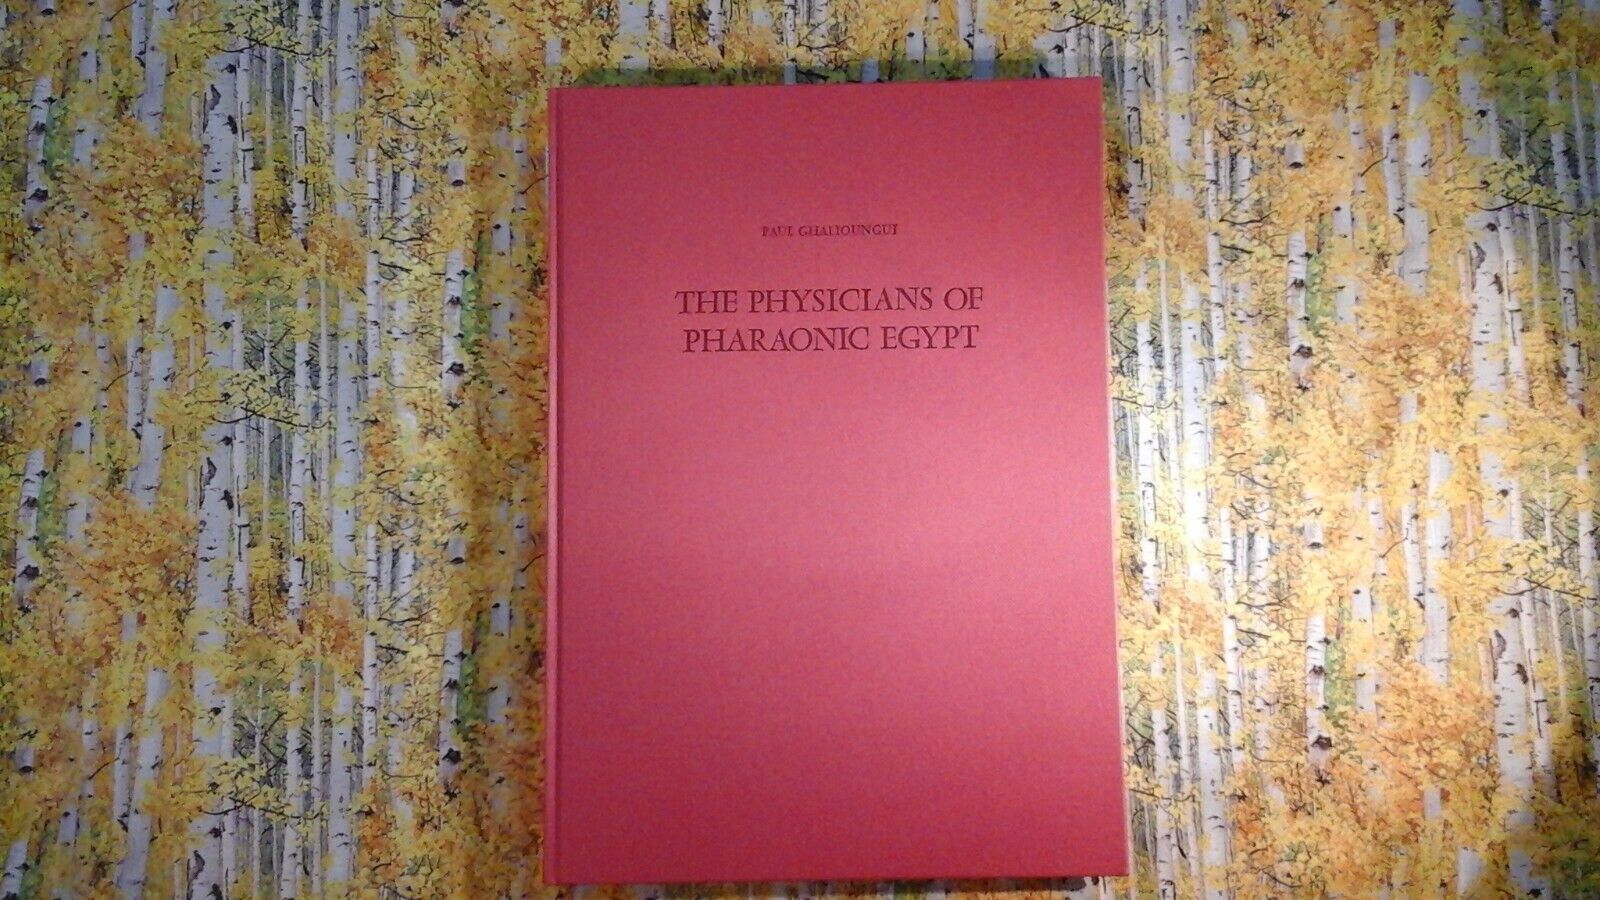 The Physicians of Pharaonic Egypt -- 1st ed. 1983 Paul Ghalioungui - hb.